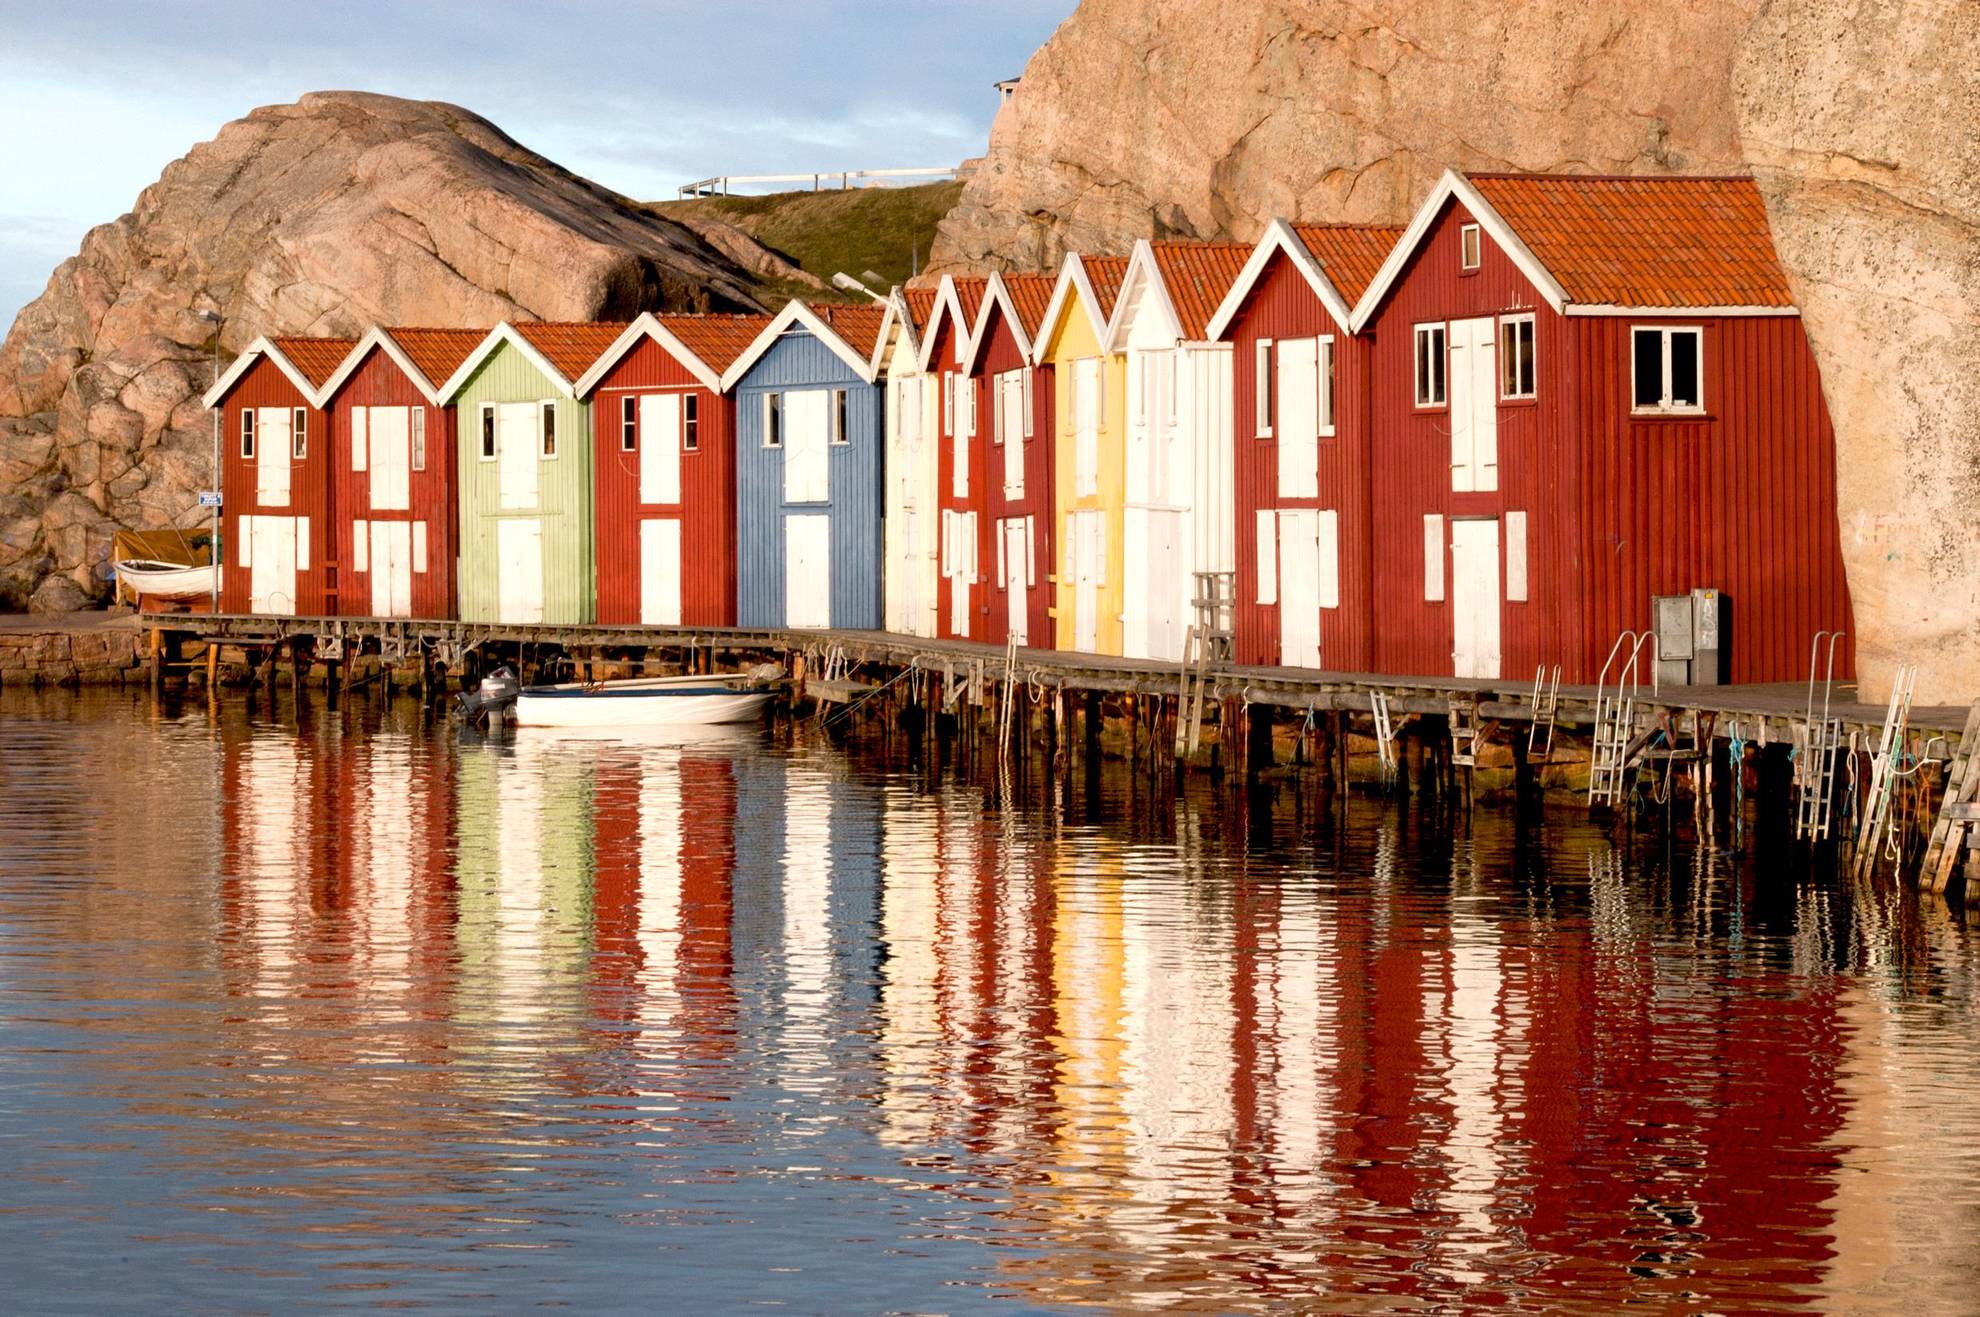 In Smögen, colourful fishing huts line up against the cliffs, their silhouettes reflected in the ocean. .